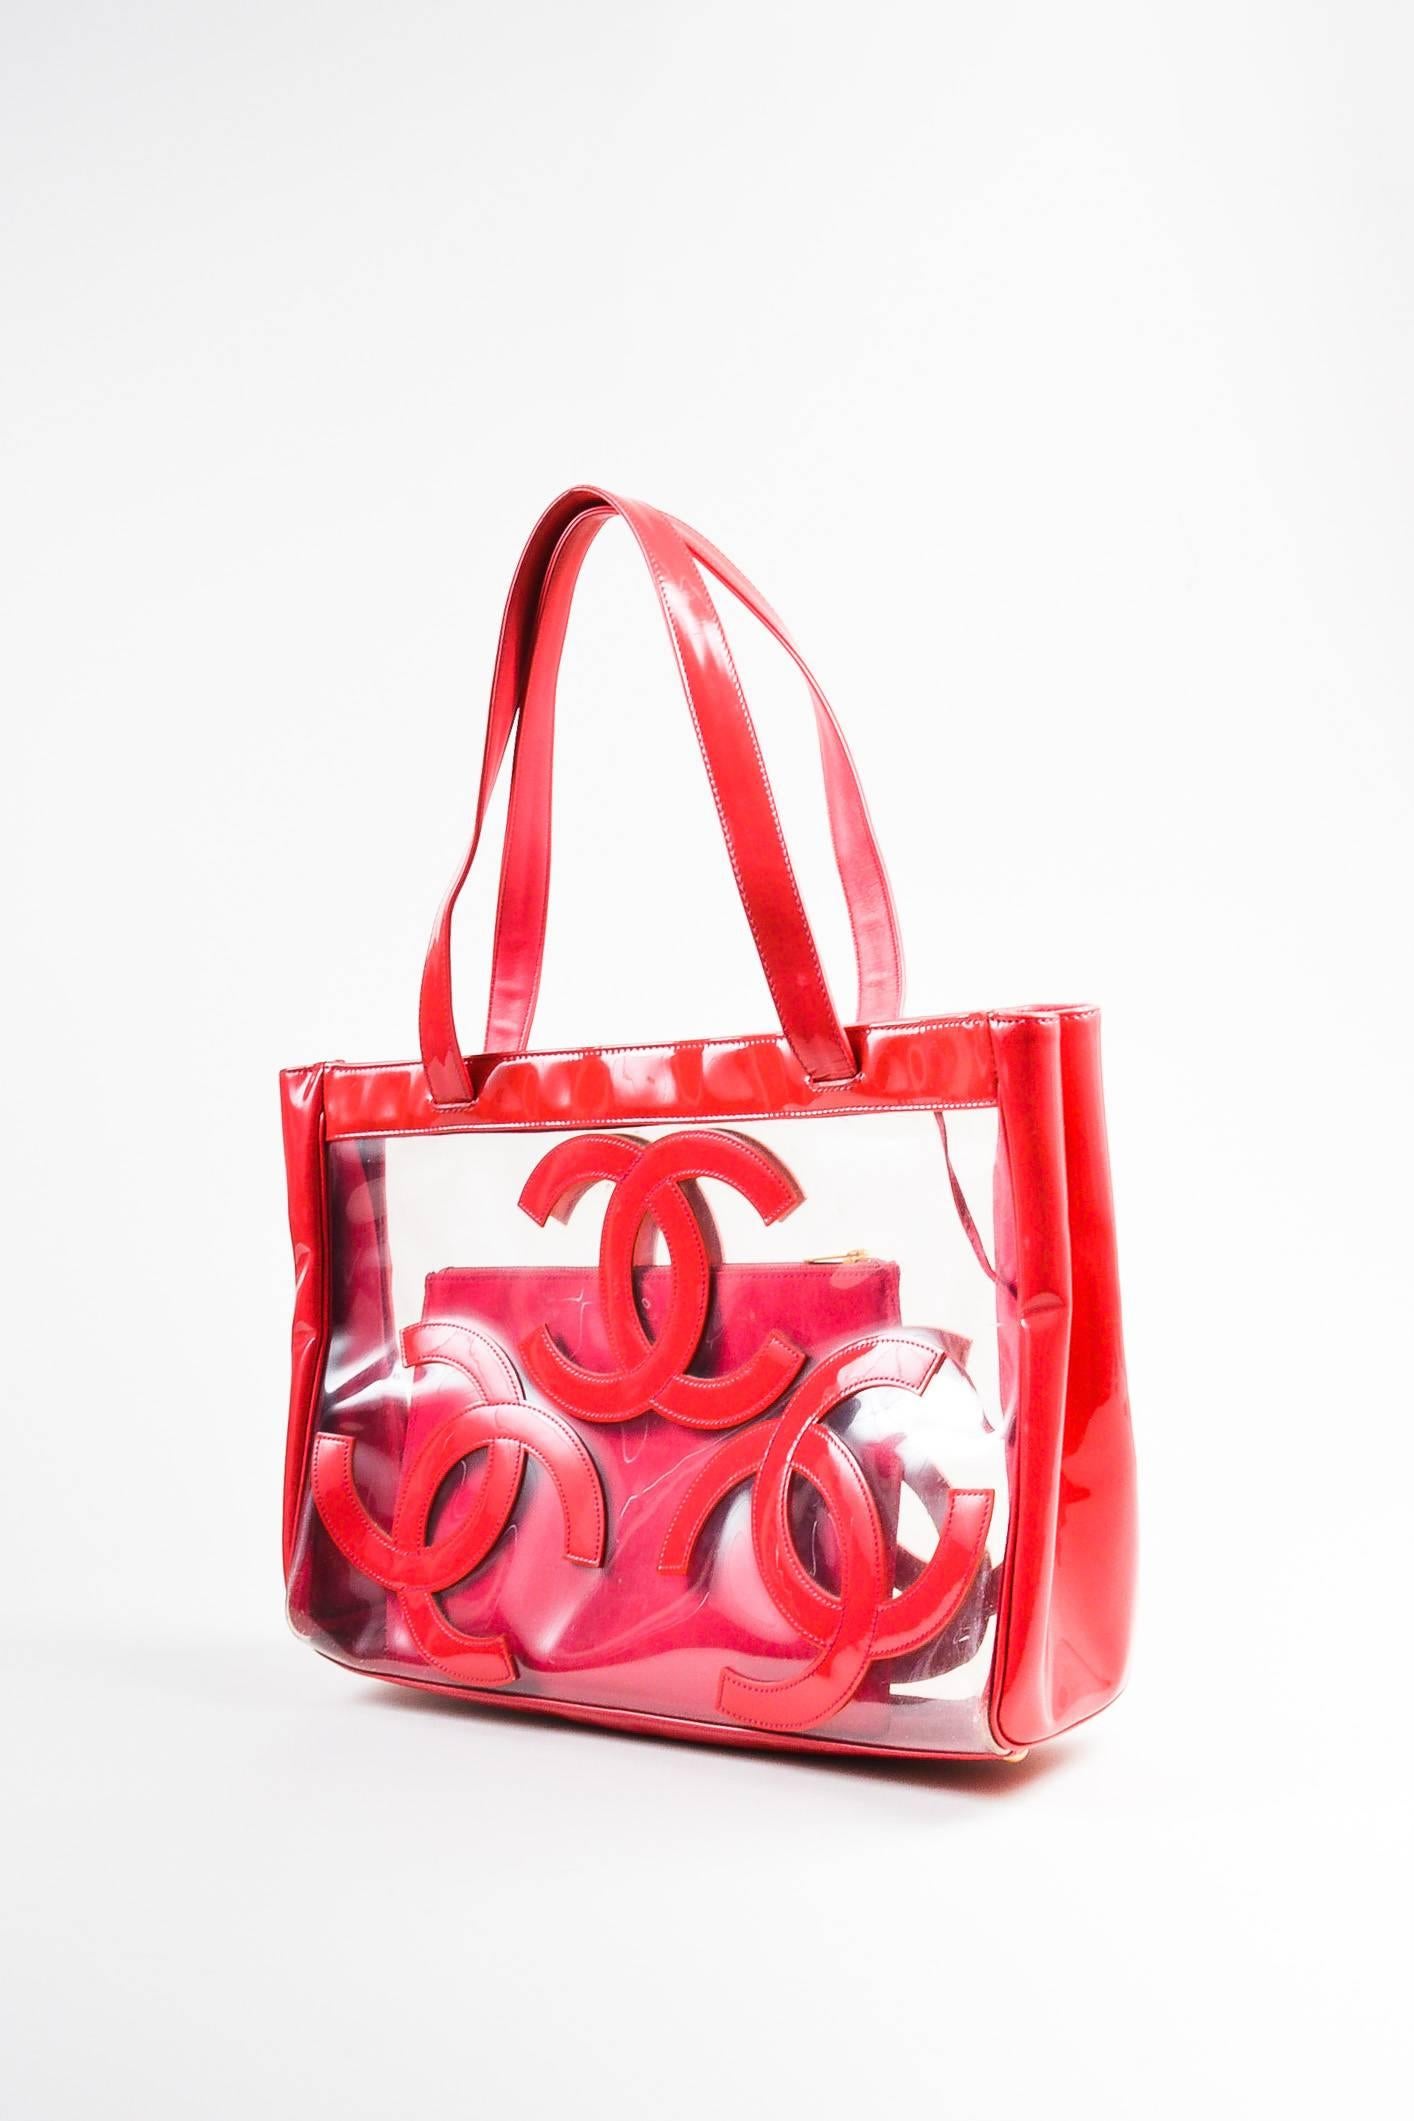 Released circa 2004-2005. A must-have beach accessory in a lighthearted hue, this tote features interlocking 'CC' panels on a transparent background, dual flat straps, an east-west silhouette, and a footed seat. Snap closure concealed at the